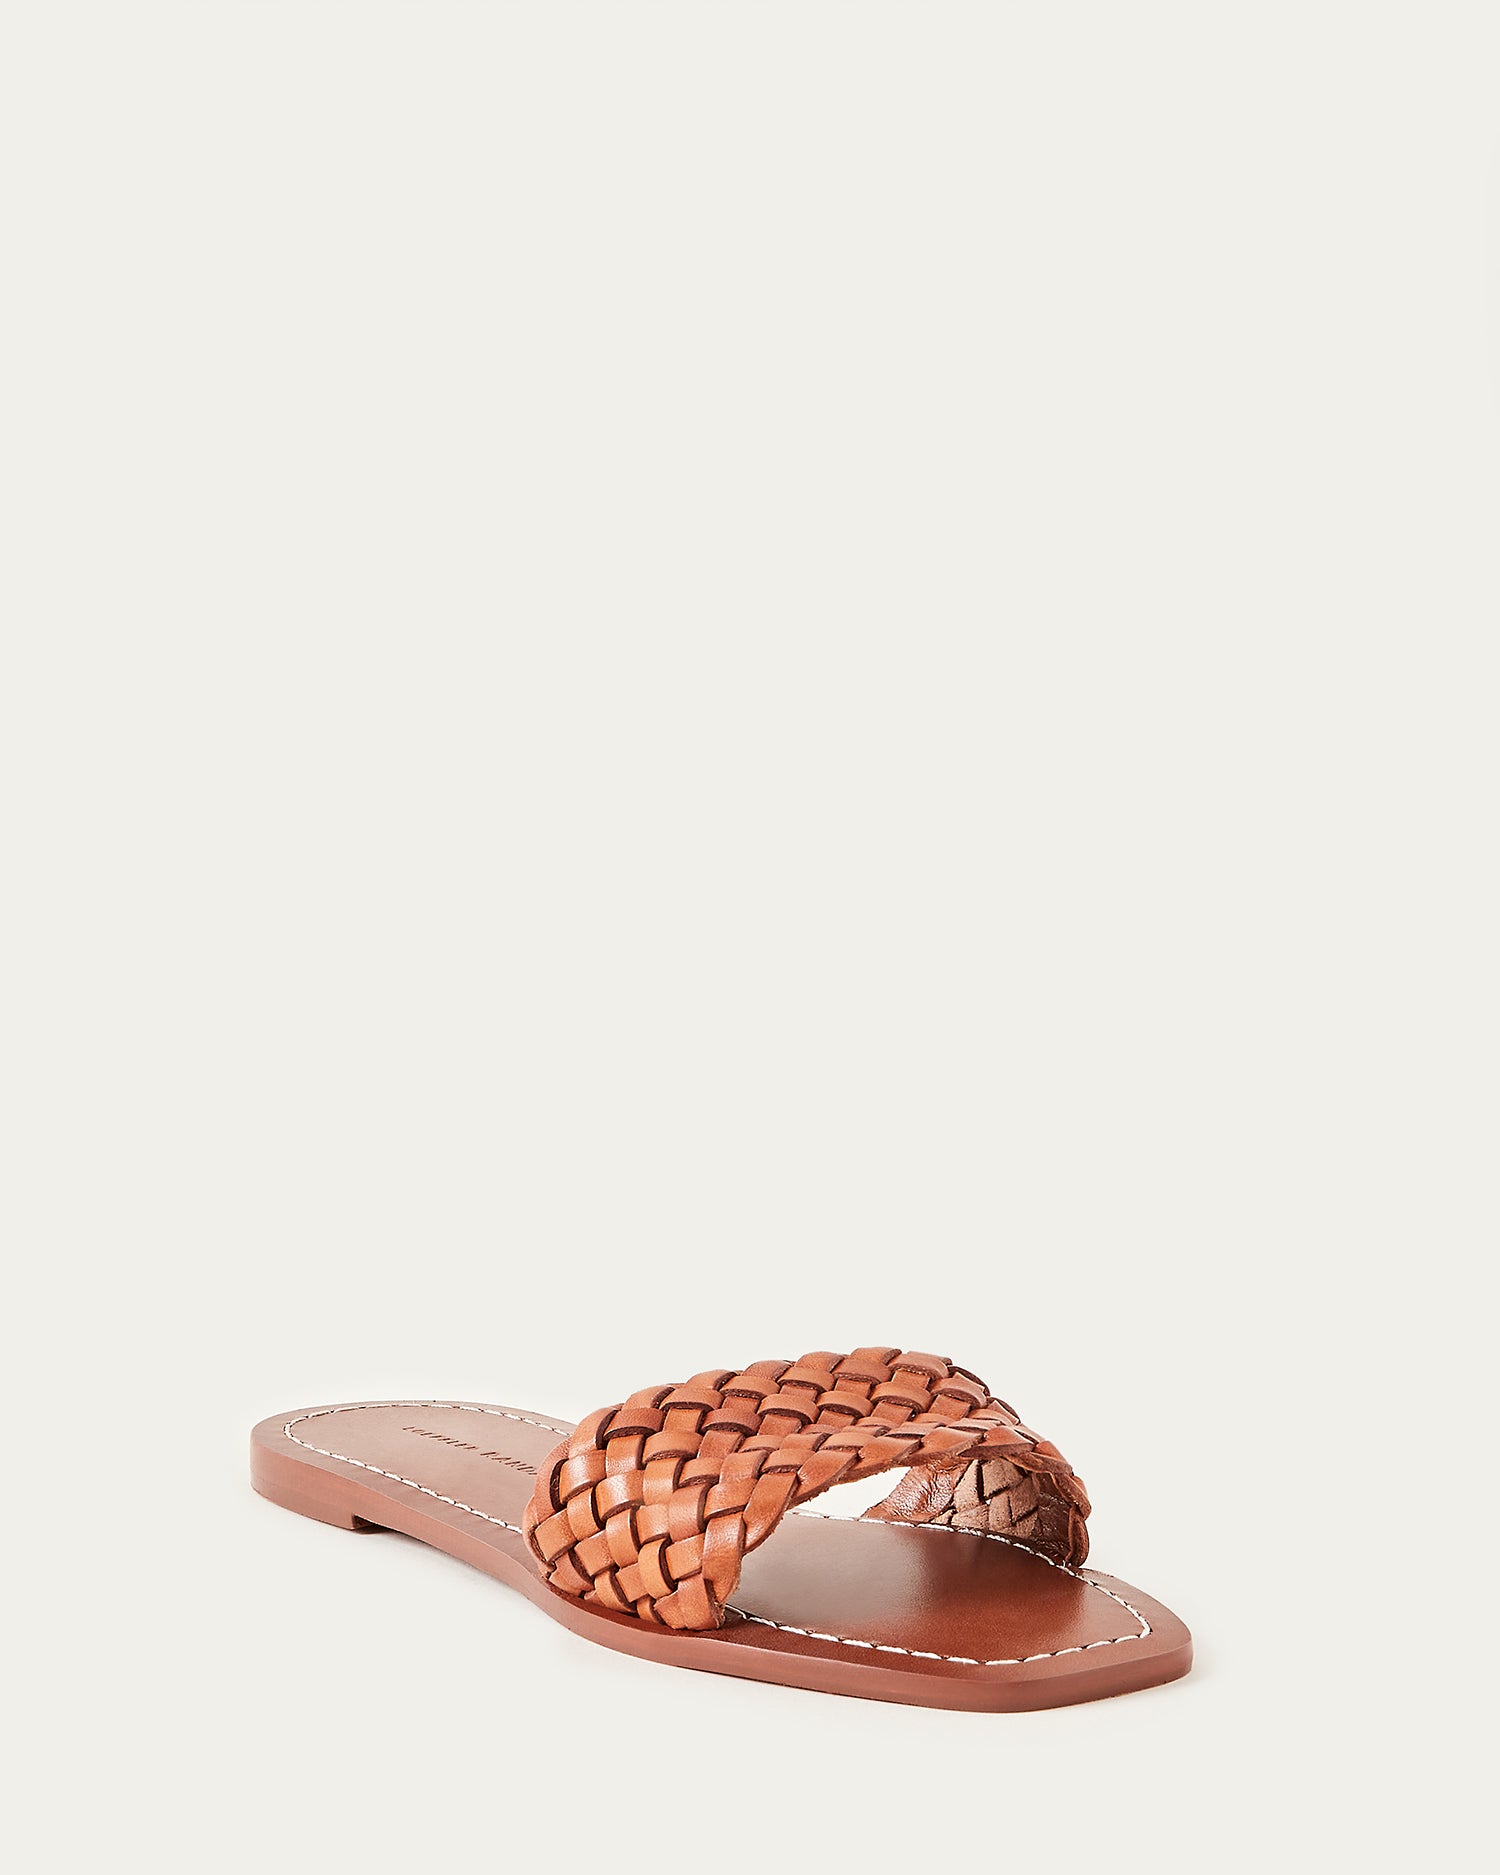 woven leather slide